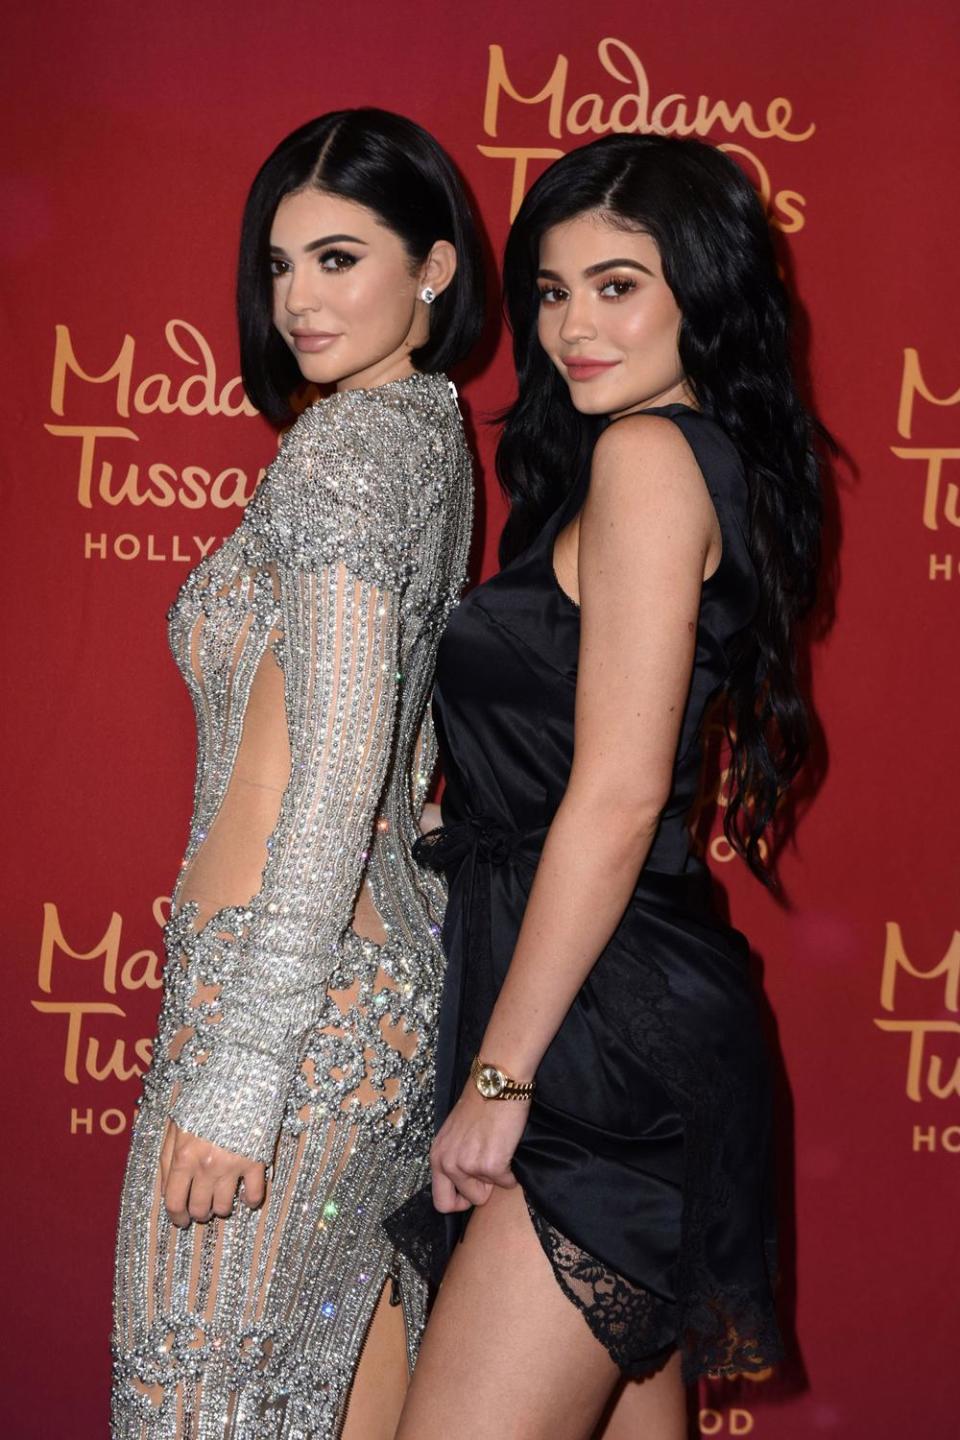 Double take: Kylie Jenner unveils her new wax figure at Madame Tussauds Hollywood (Vivien Killilea/Getty)